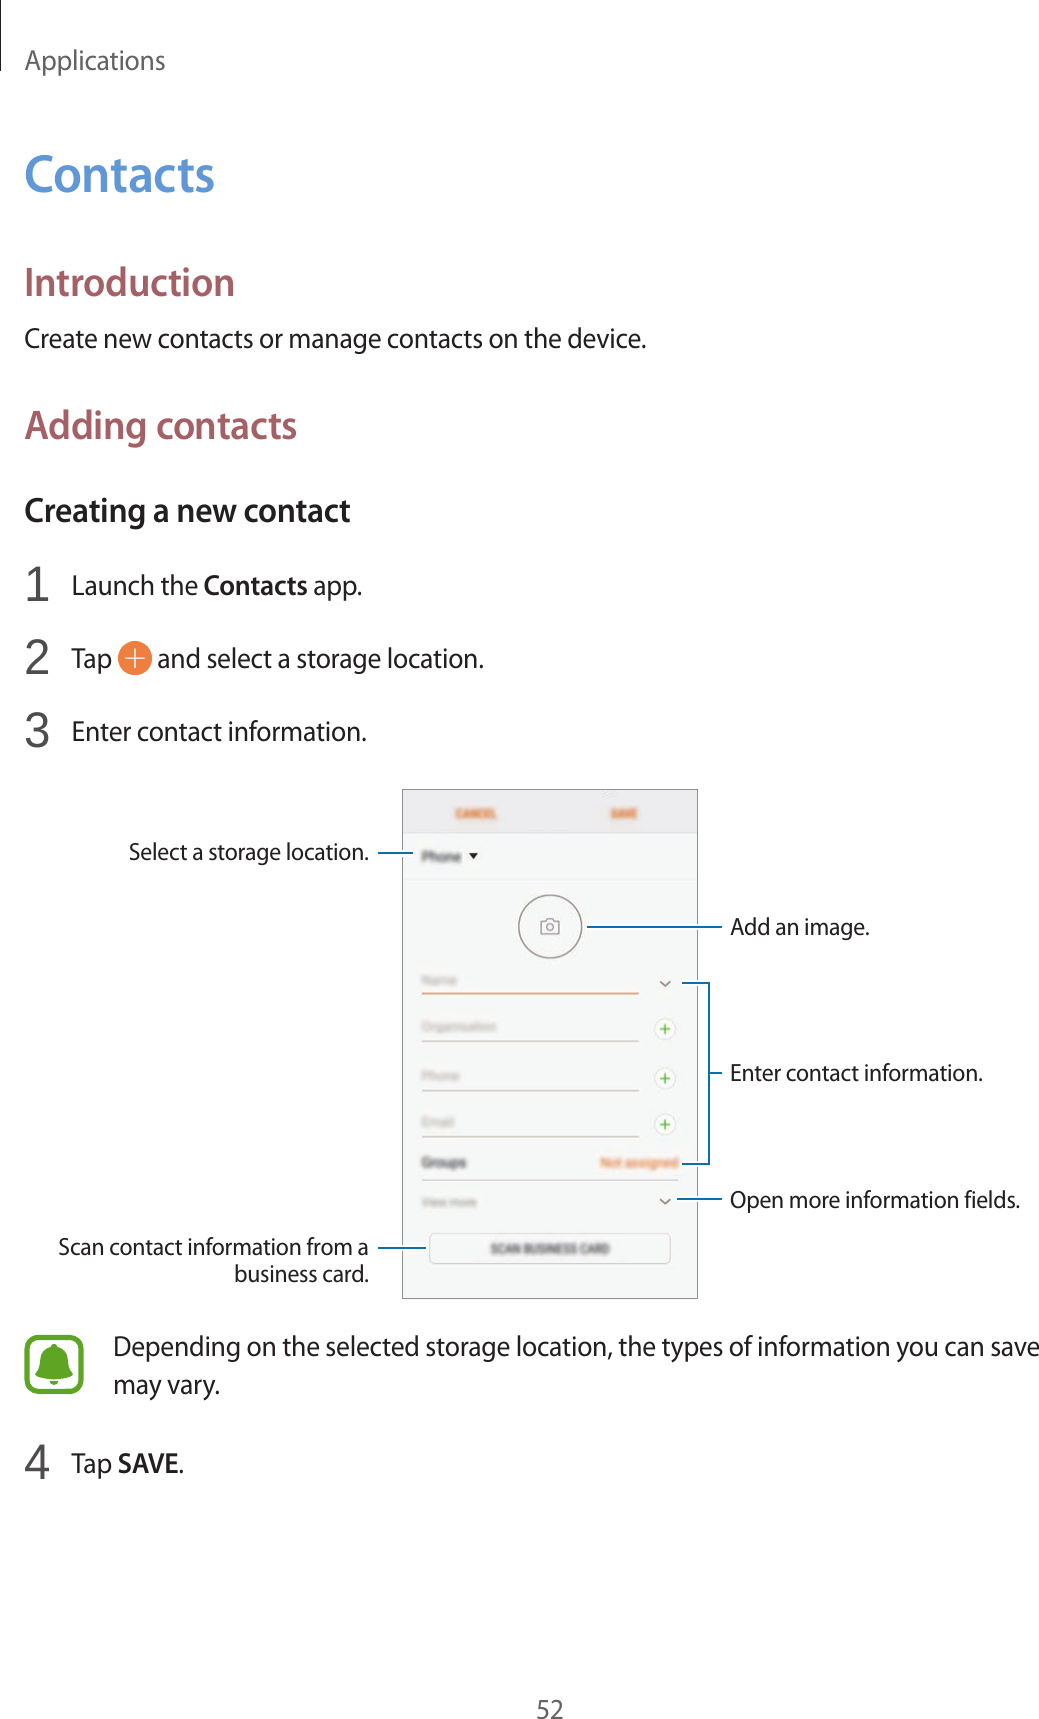 Applications52ContactsIntroductionCreate new contacts or manage contacts on the device.Adding contactsCreating a new contact1  Launch the Contacts app.2  Tap   and select a storage location.3  Enter contact information.Select a storage location.Add an image.Open more information fields.Scan contact information from a business card.Enter contact information.Depending on the selected storage location, the types of information you can save may vary.4  Tap SAVE.